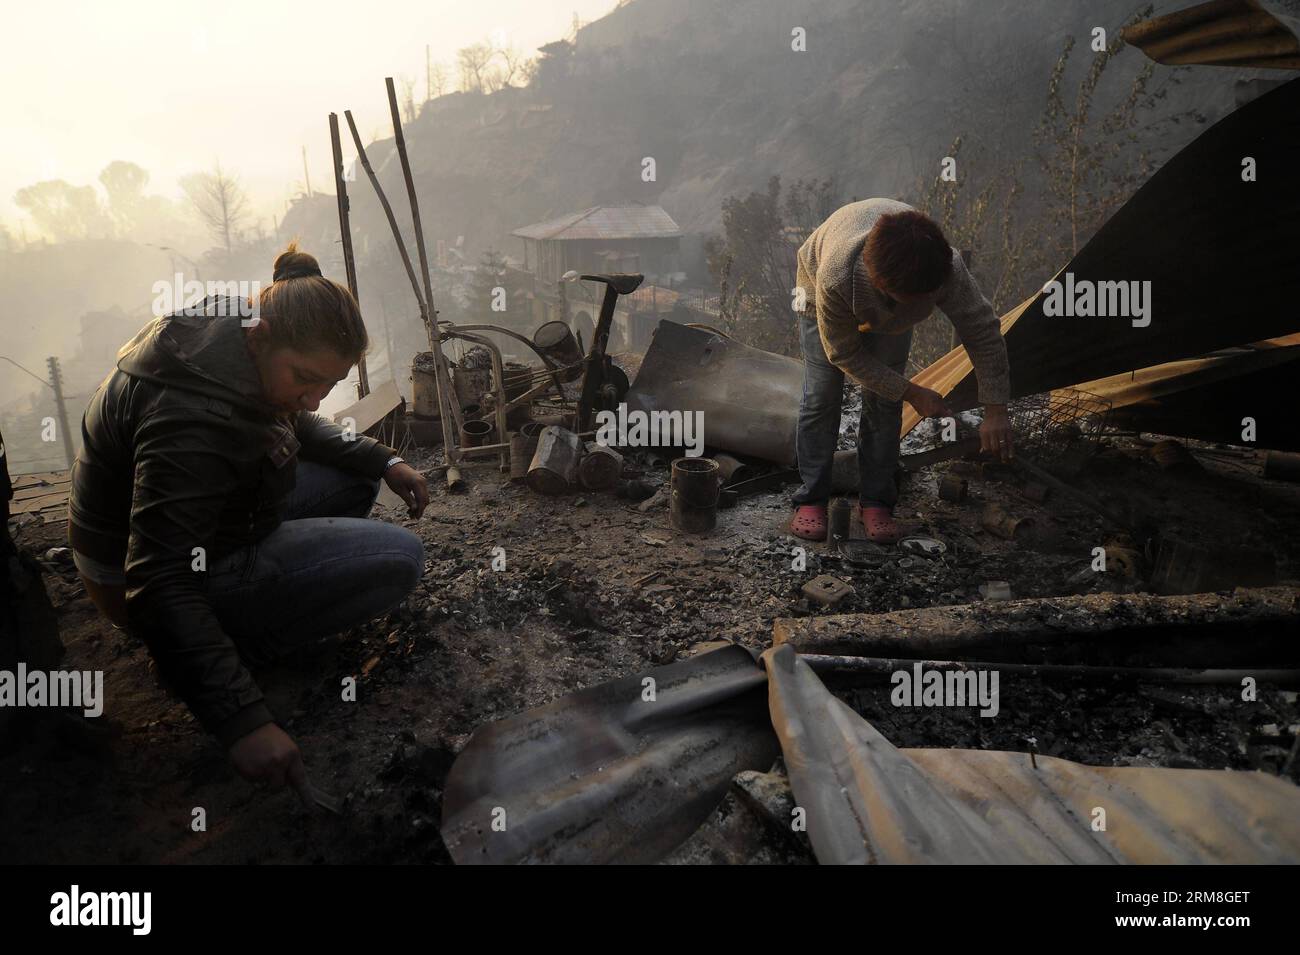 Residents search for their belongings in a house destroyed by a fire in Valparaiso, Chile on April 13, 2014. At least 11 people were killed over the weekend in a massive forest fire that broke out in Chile s port city of Valparaiso, authorities said Sunday. President Michelle Bachelet declared state of emergency in the city and sent the army in to maintain order as thousands of residents were evacuated. (Xinhua/Pablo Ovalle/AGENCIA UNO) CHILE-VALPARAISO-FIRE PUBLICATIONxNOTxINxCHN   Residents Search for their belonging in a House destroyed by a Fire in Valparaiso Chile ON April 13 2014 AT leas Stock Photo